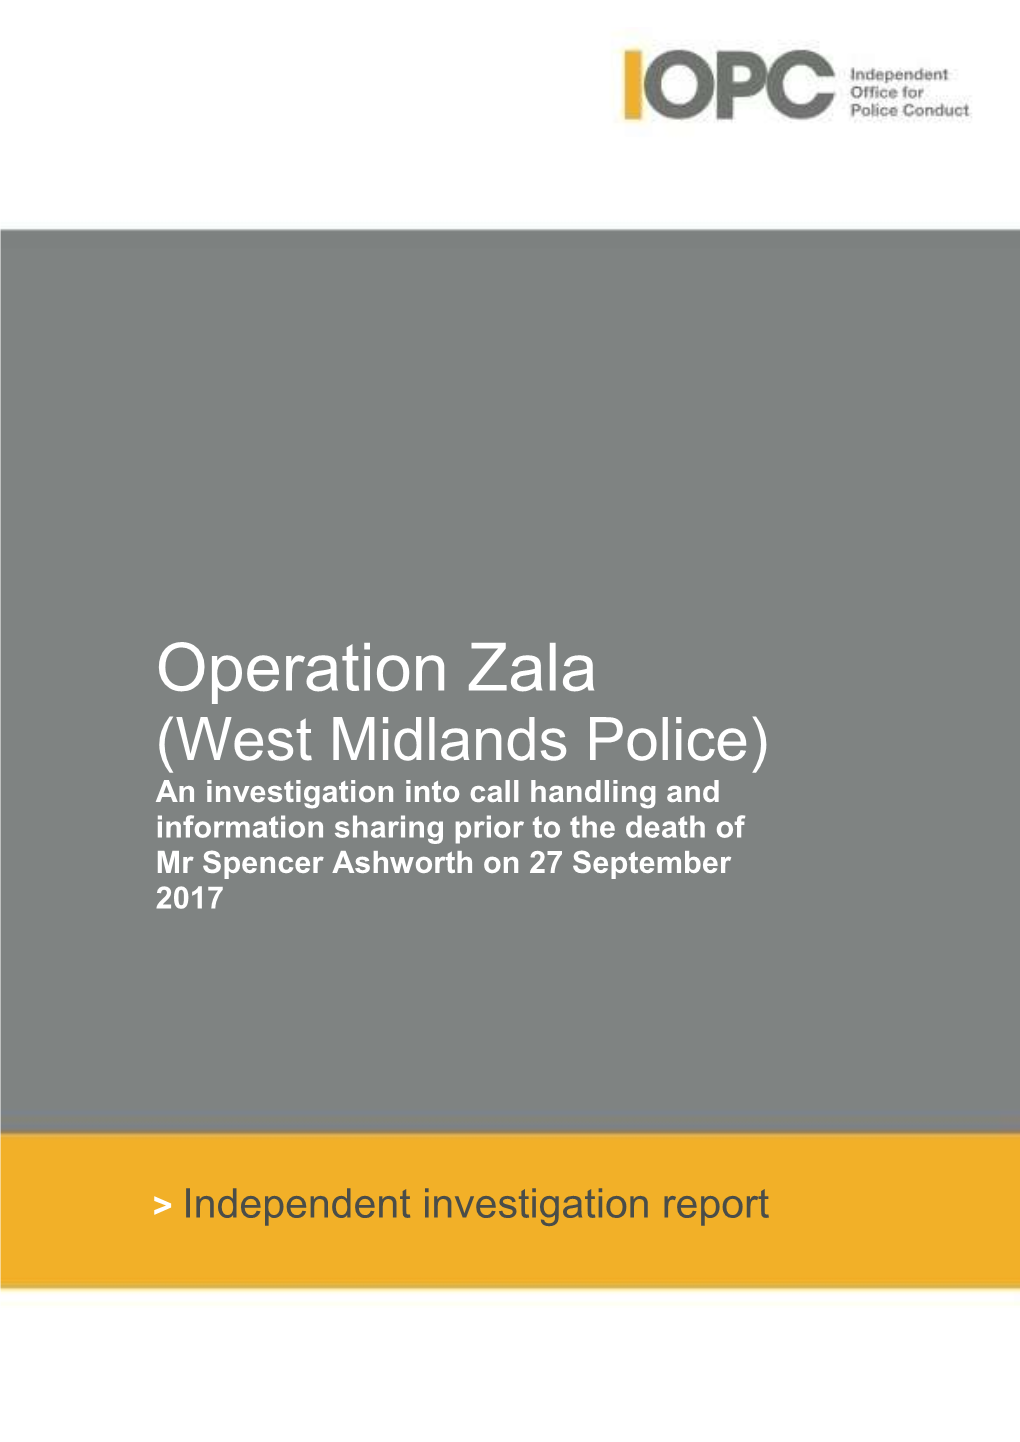 Operation Zala (West Midlands Police) an Investigation Into Call Handling and Information Sharing Prior to the Death of Mr Spencer Ashworth on 27 September 2017